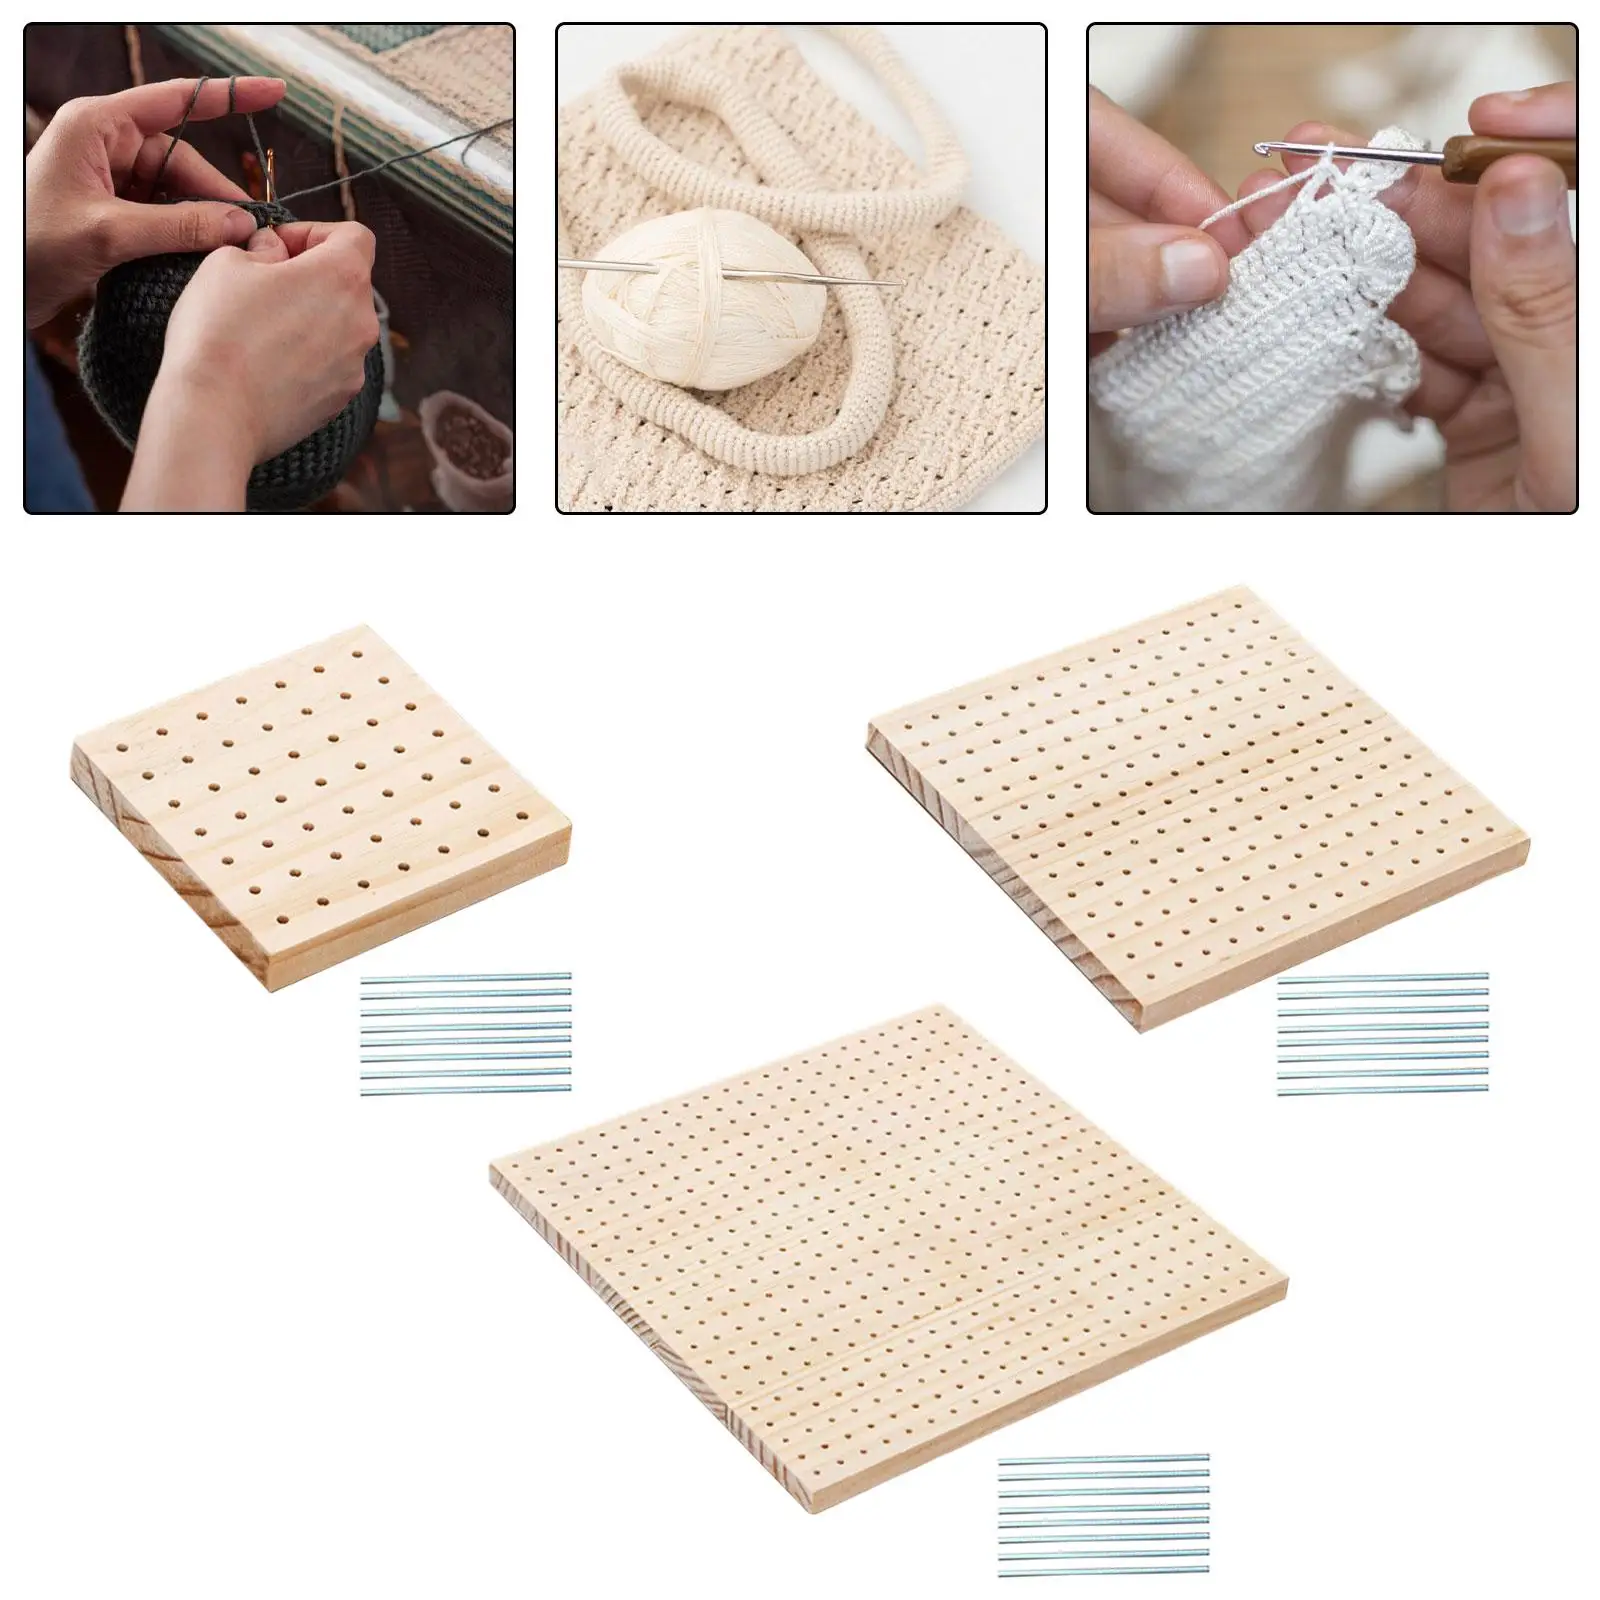 Wooden Crochet Blocking Boards with Handmade Knitting Blocking Pegs for Granny